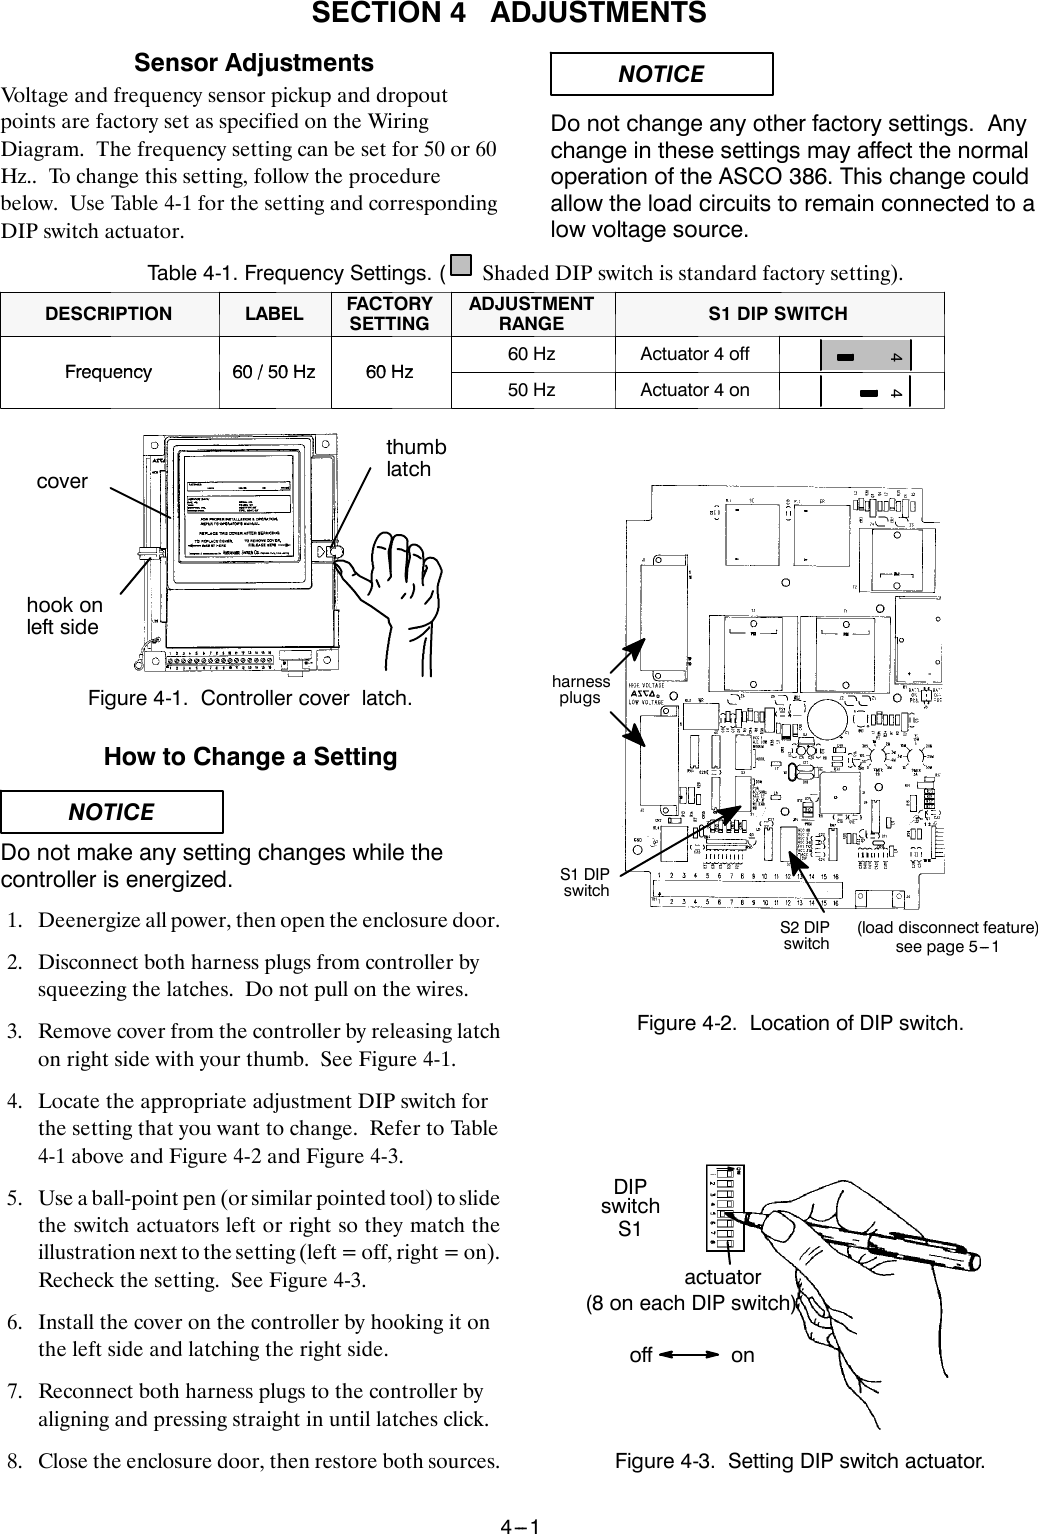 Page 10 of 12 - Emerson Emerson-Series-386-E-Design-Users-Manual- Operator's Manual For Series 386 N-ATS E 260-400 A, G 1000-3000 A UL/CSA  Emerson-series-386-e-design-users-manual